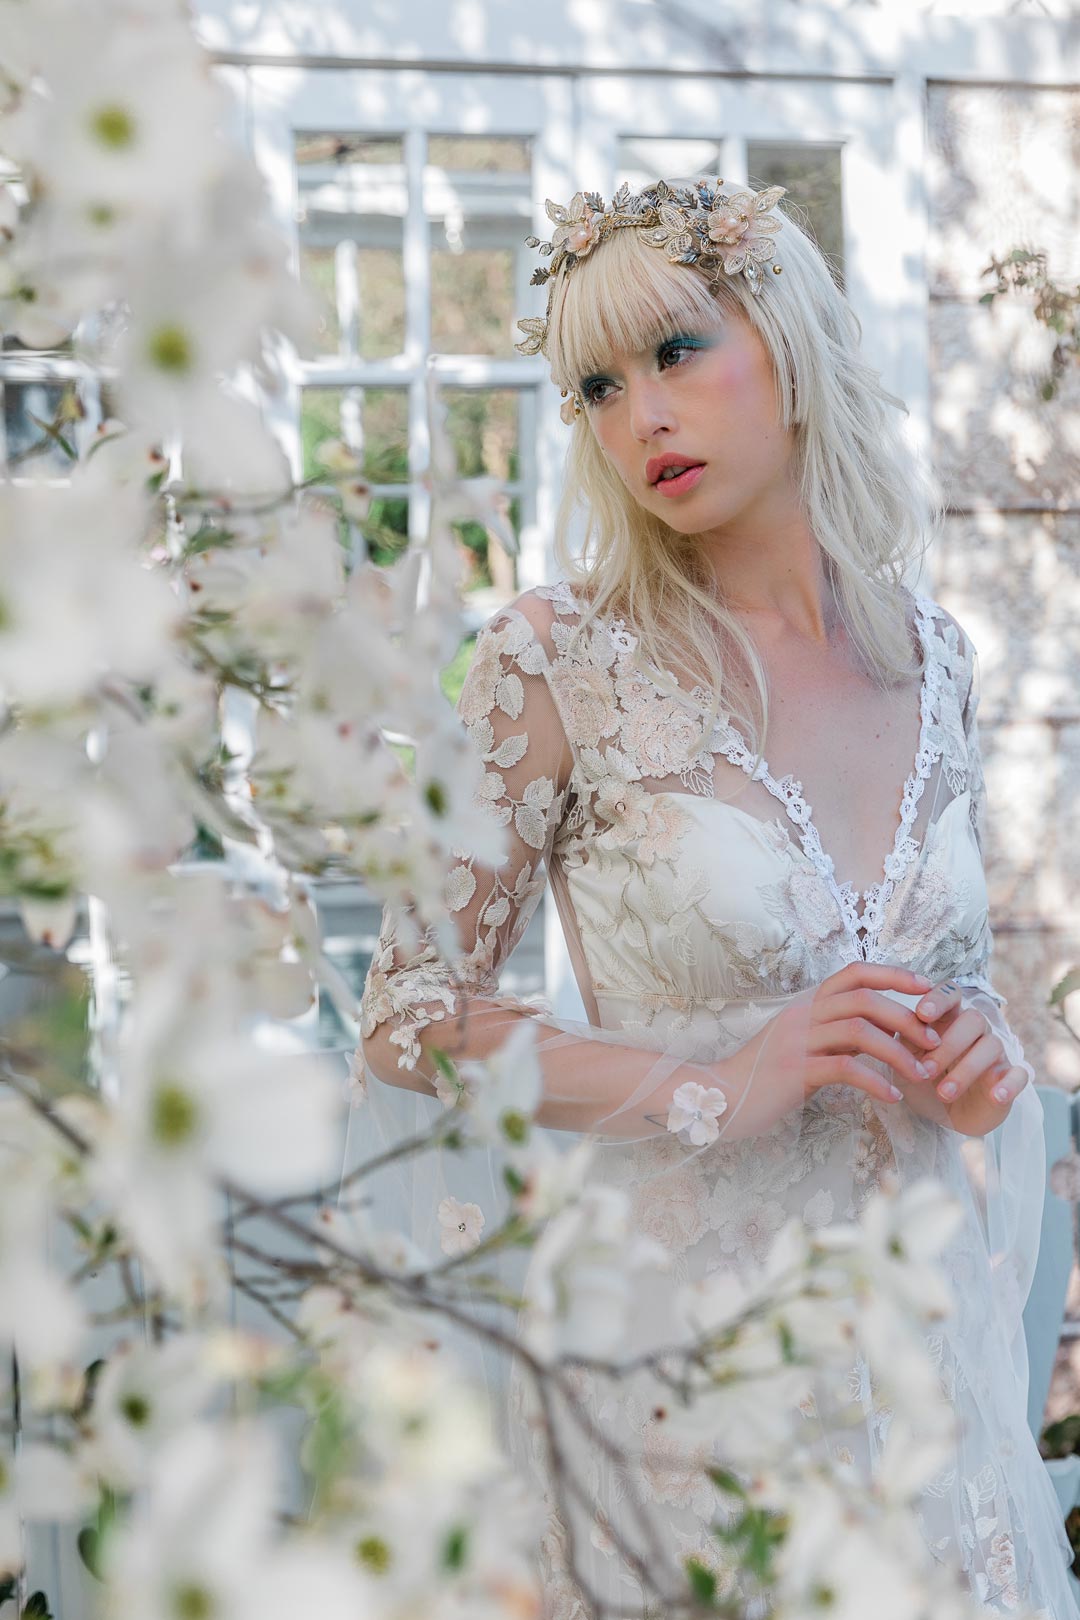 Model in Cherry Blossom Wedding Dress Les Fleurs Collection